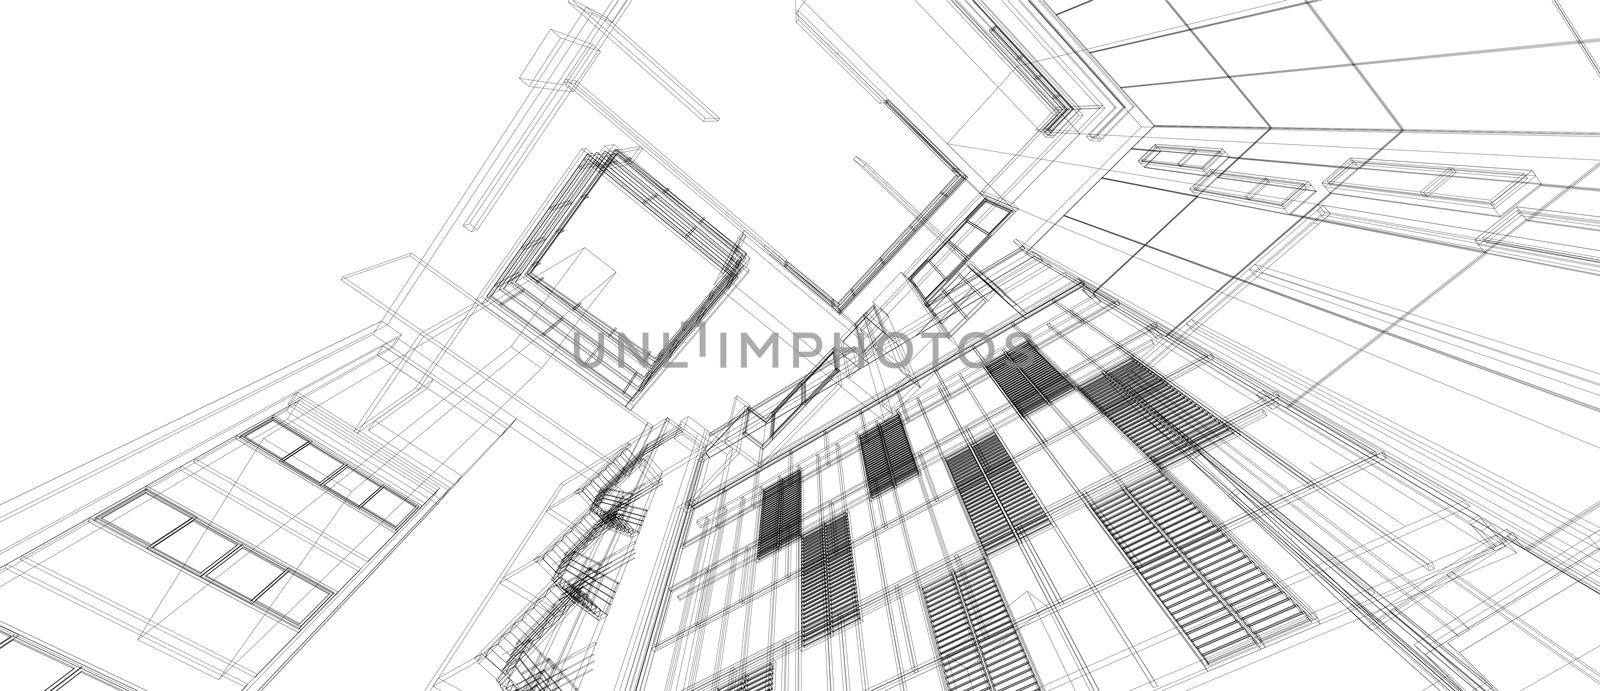 Architecture building space design concept 3d perspective wire frame rendering isolated white background. For abstract background or wallpaper desktops computer technology design architectural theme. by Petrichor